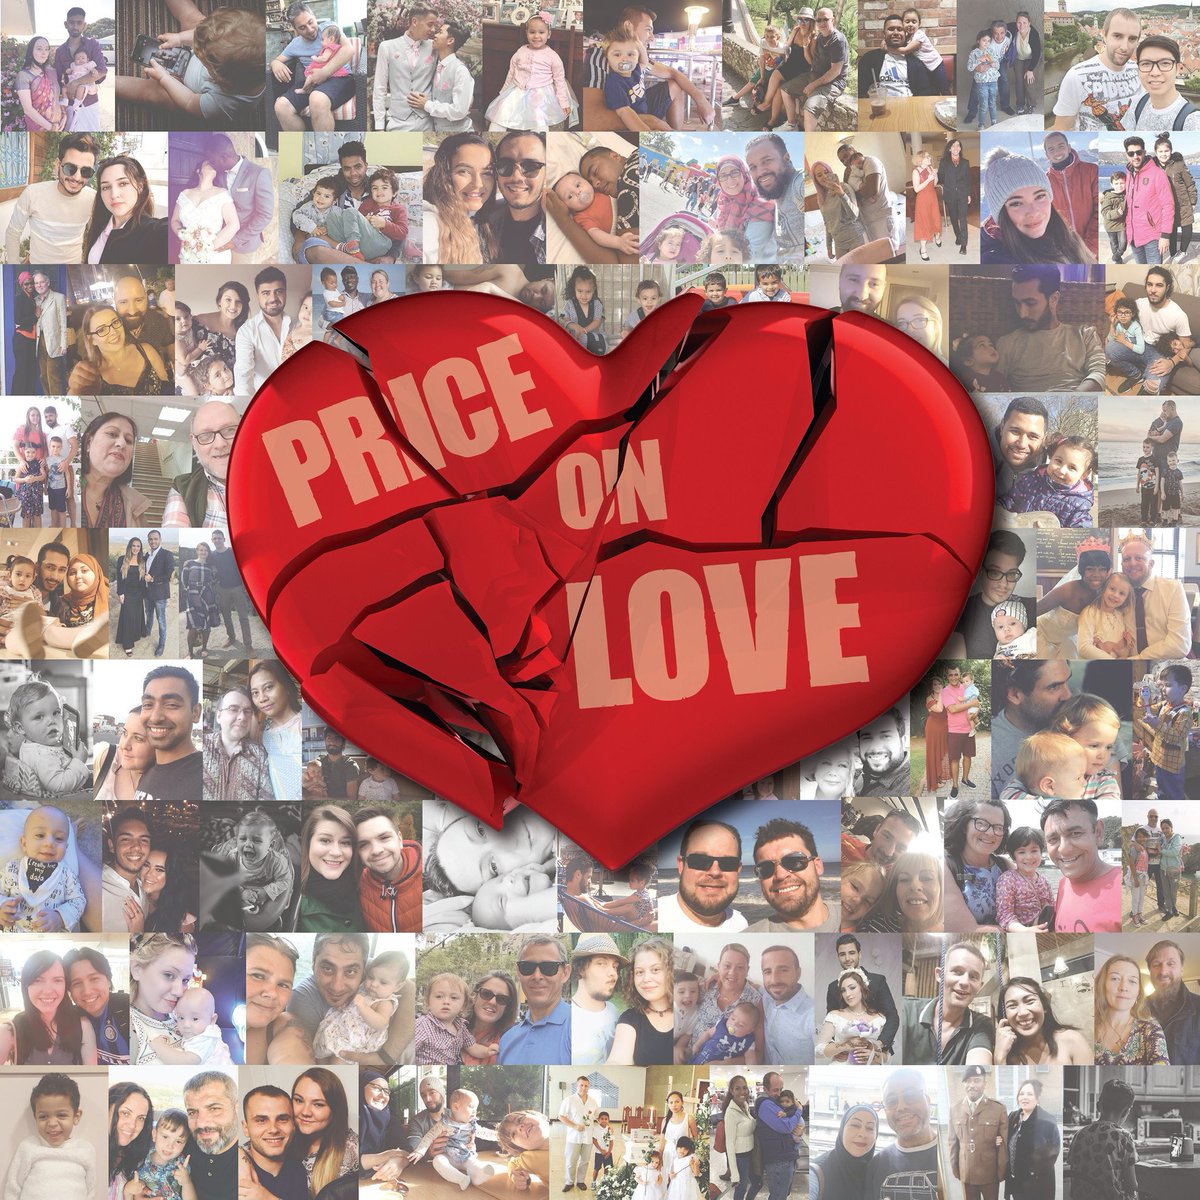 @BorisJohnson  these are some of the many thousands of families, my son and his father included who are separated due to your harsh MIR policy. So while you Cosy up with loved ones this Valentine’s Day, spare a thought for us who are 4,000 miles apart  #priceonlove #HaveAHeart